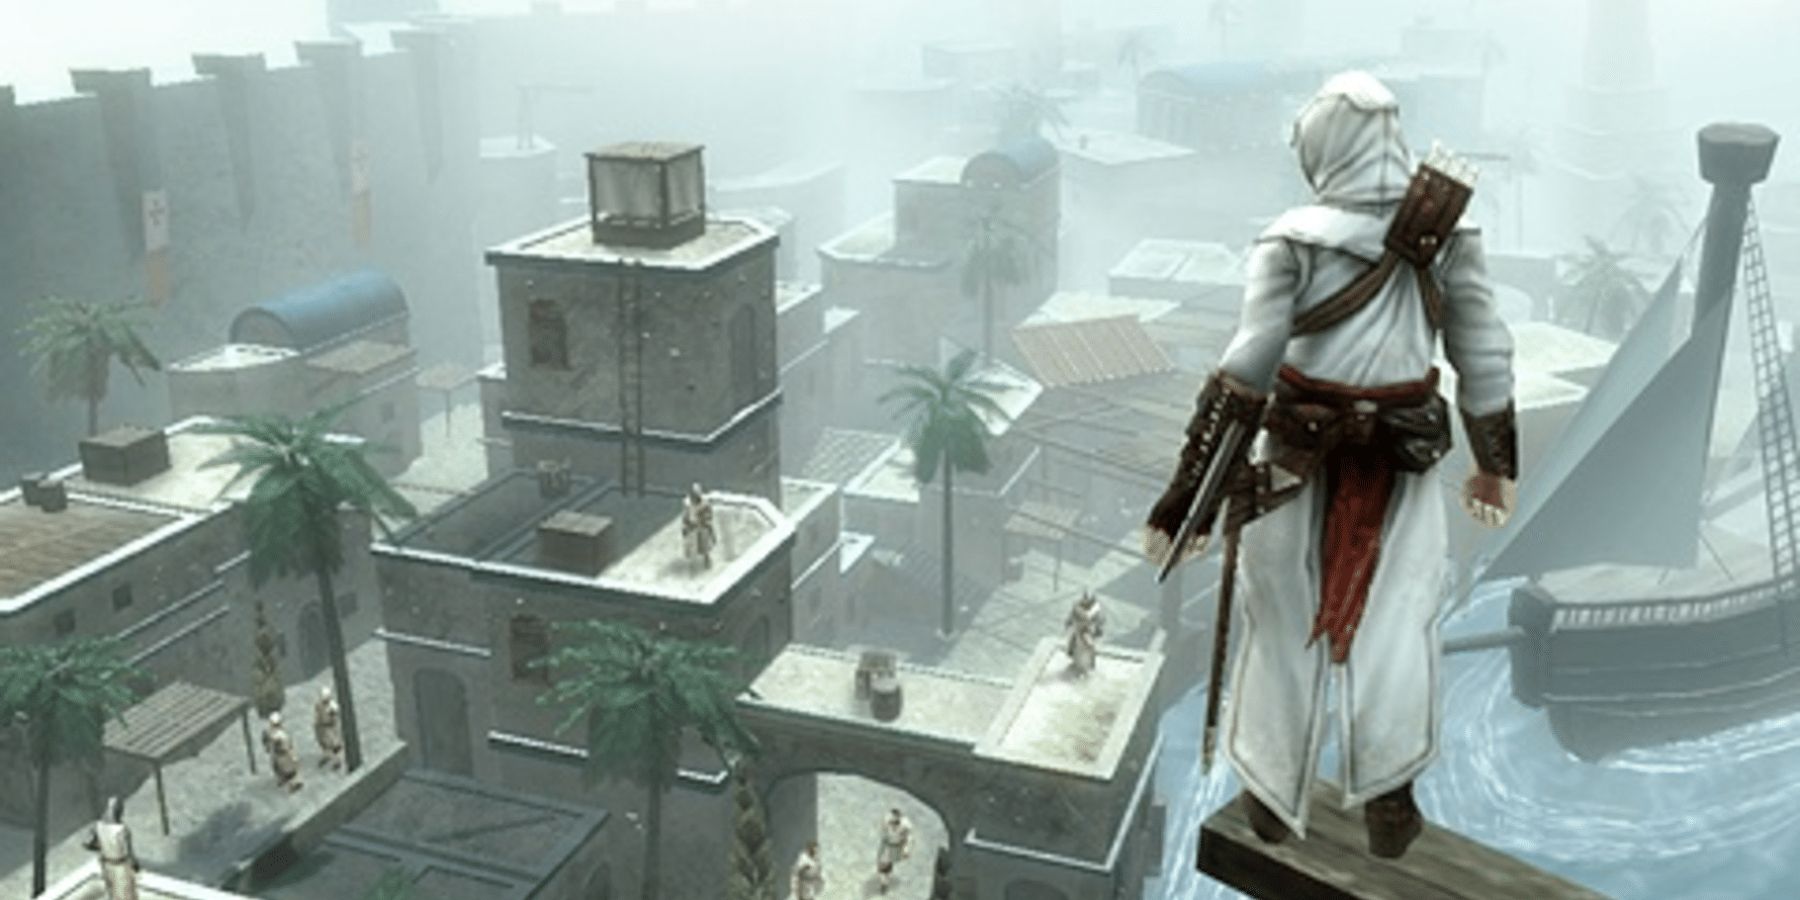 Assassin’s Creed Best NonConsole Games Ranked